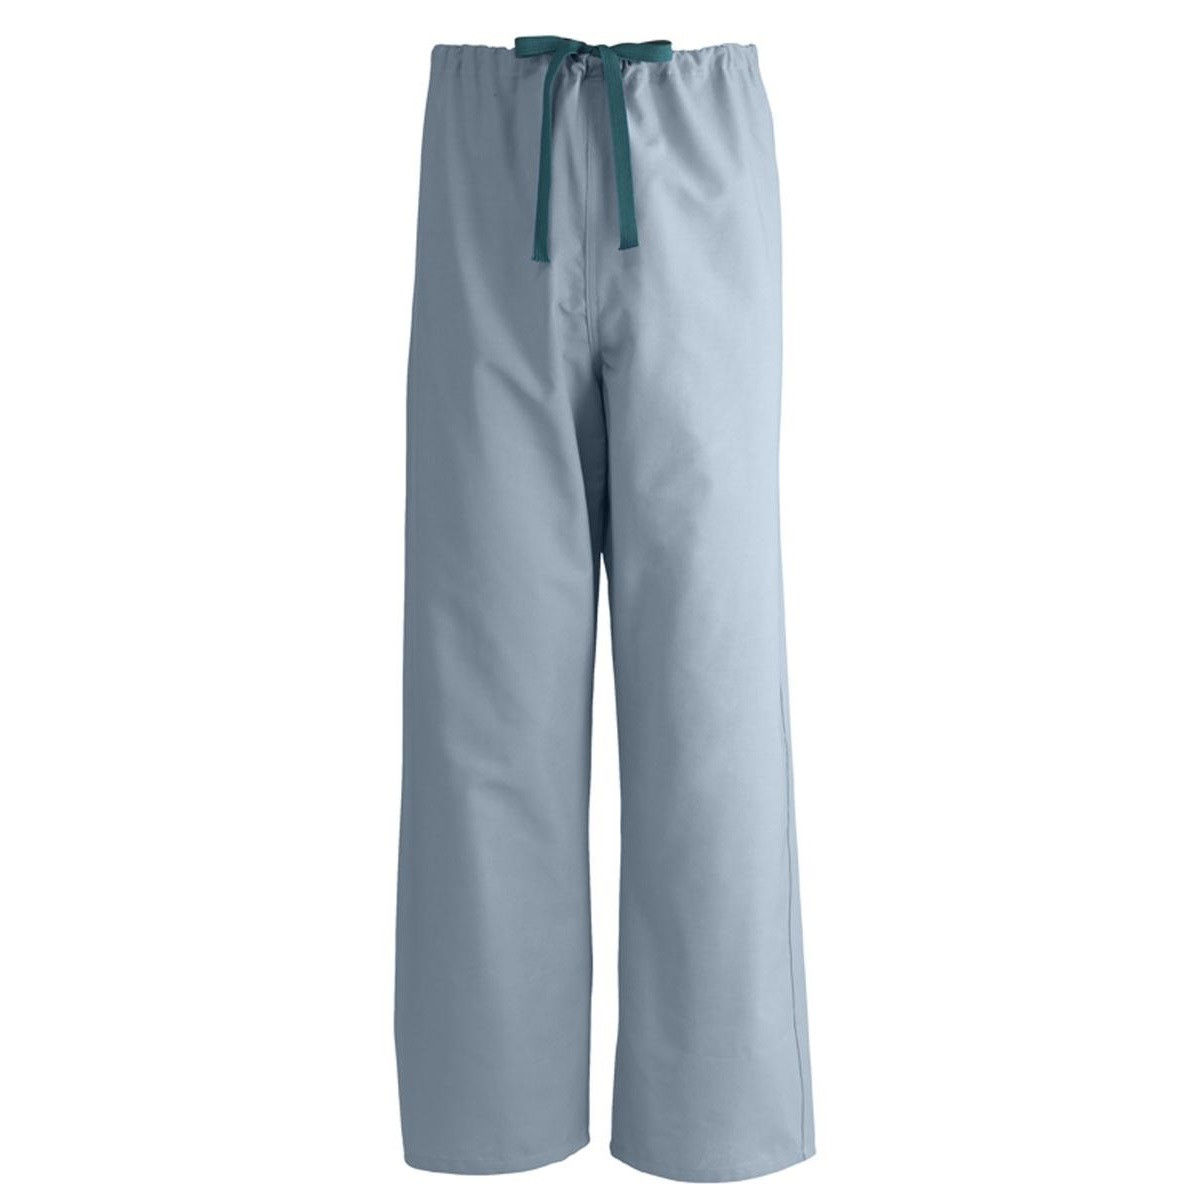 From which location are the misty green scrubs by EconoBlen shipped?